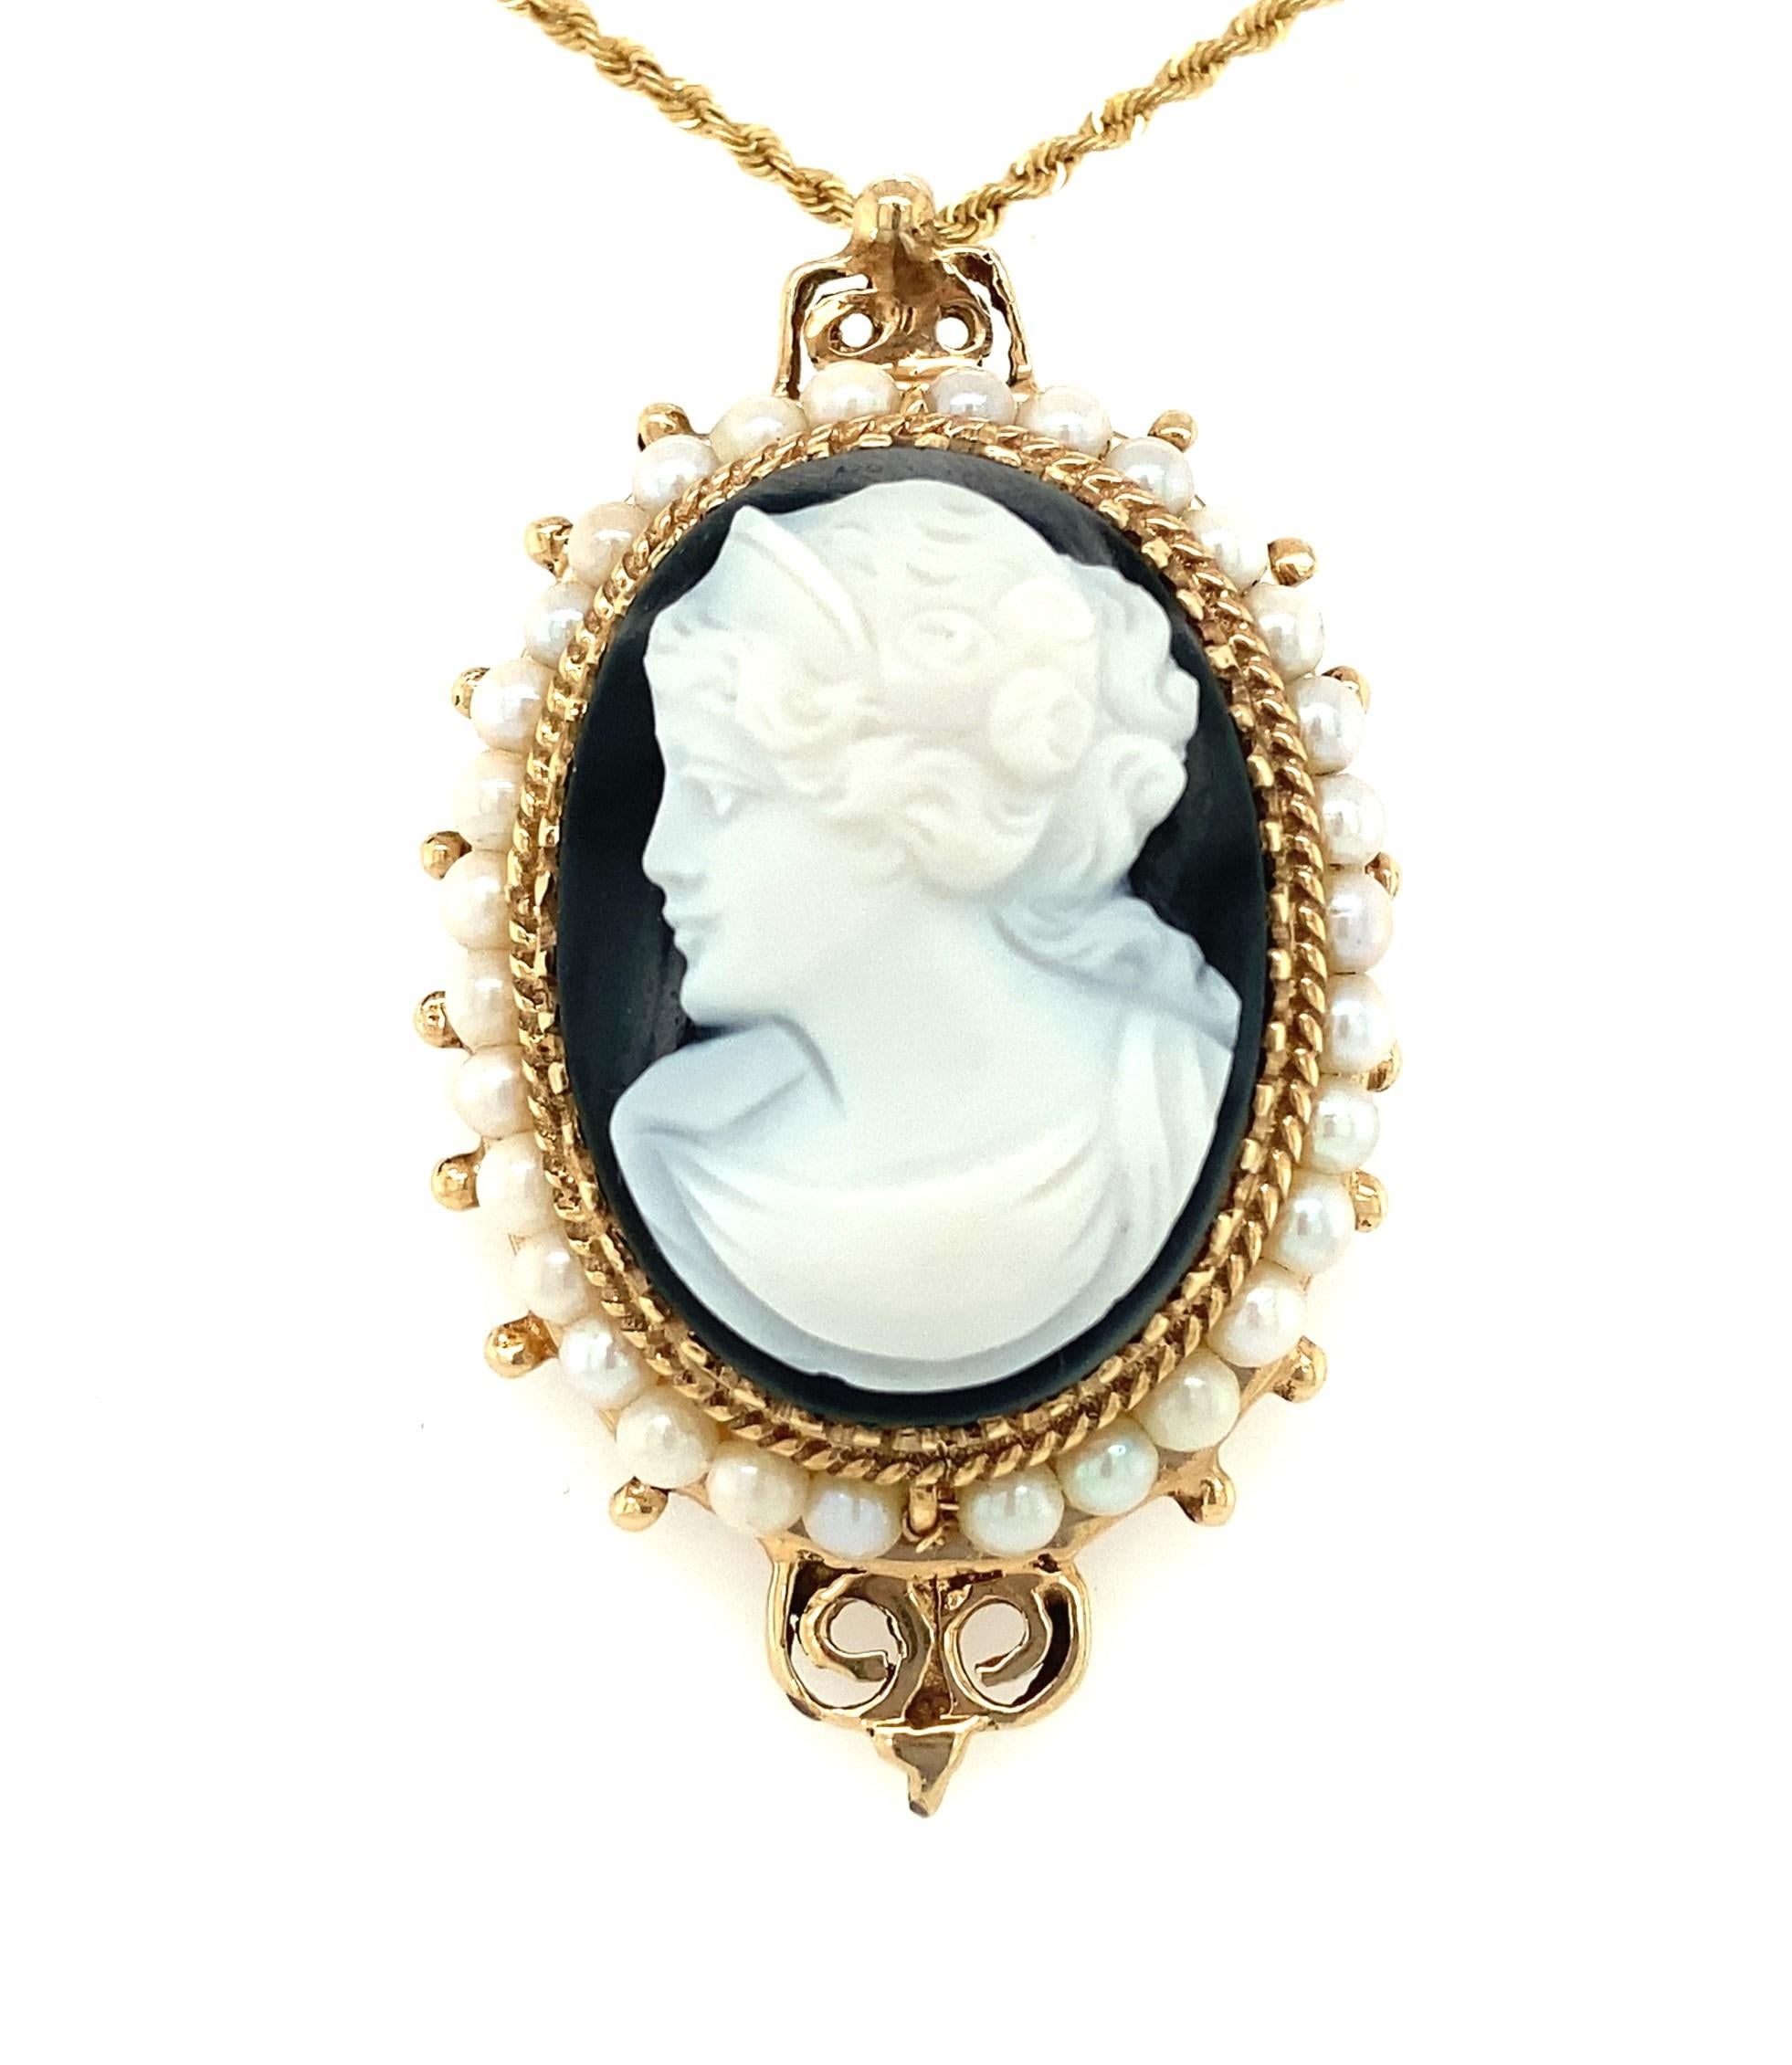 In the Victorian era, cameos were a popular souvenir to bring back from the fashionable trips to Europe. Anyone who could afford to go would tour Italy, and there they would meet skilled cameo carvers and purchase cameos set in gold. This pendant/